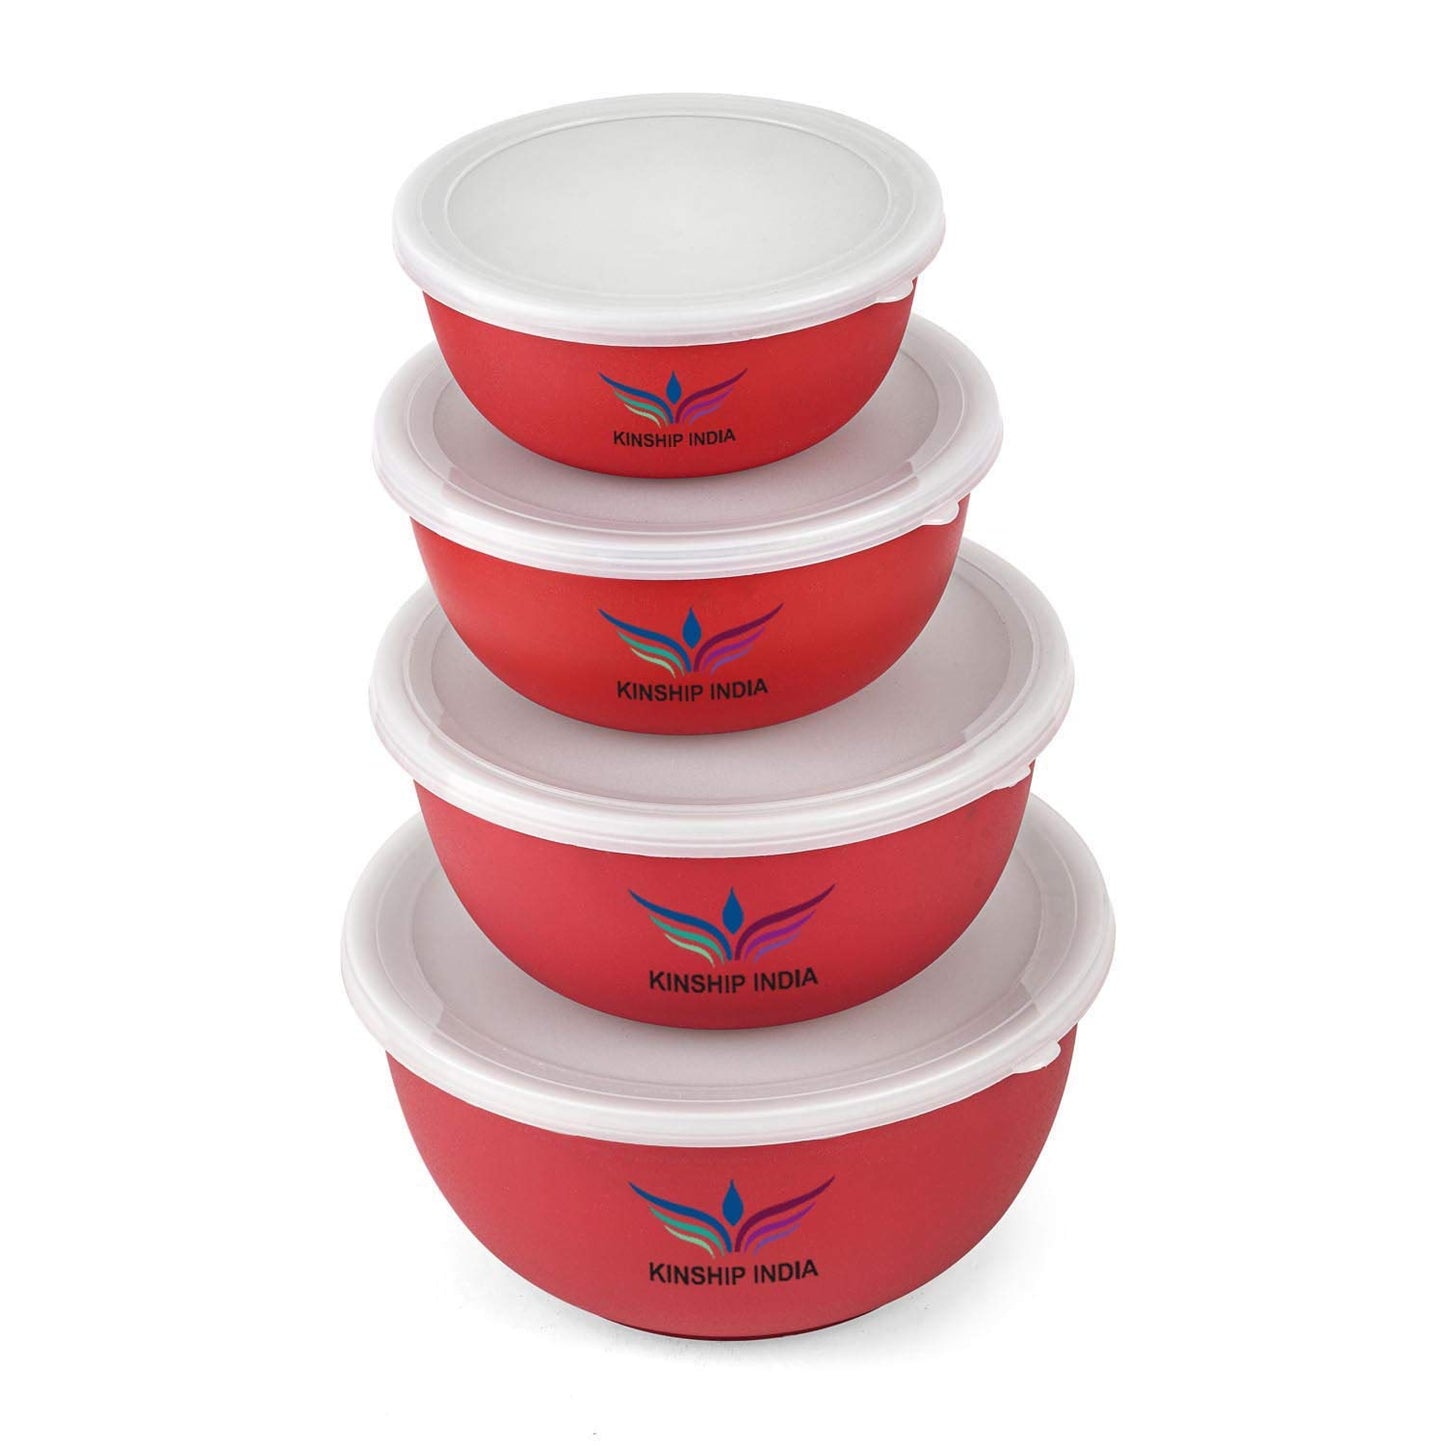 Microwave Safe Stainless Steel Plastic Coated Euro Bowl (450,700,1200 and 2000ml),Set of 4(Red)